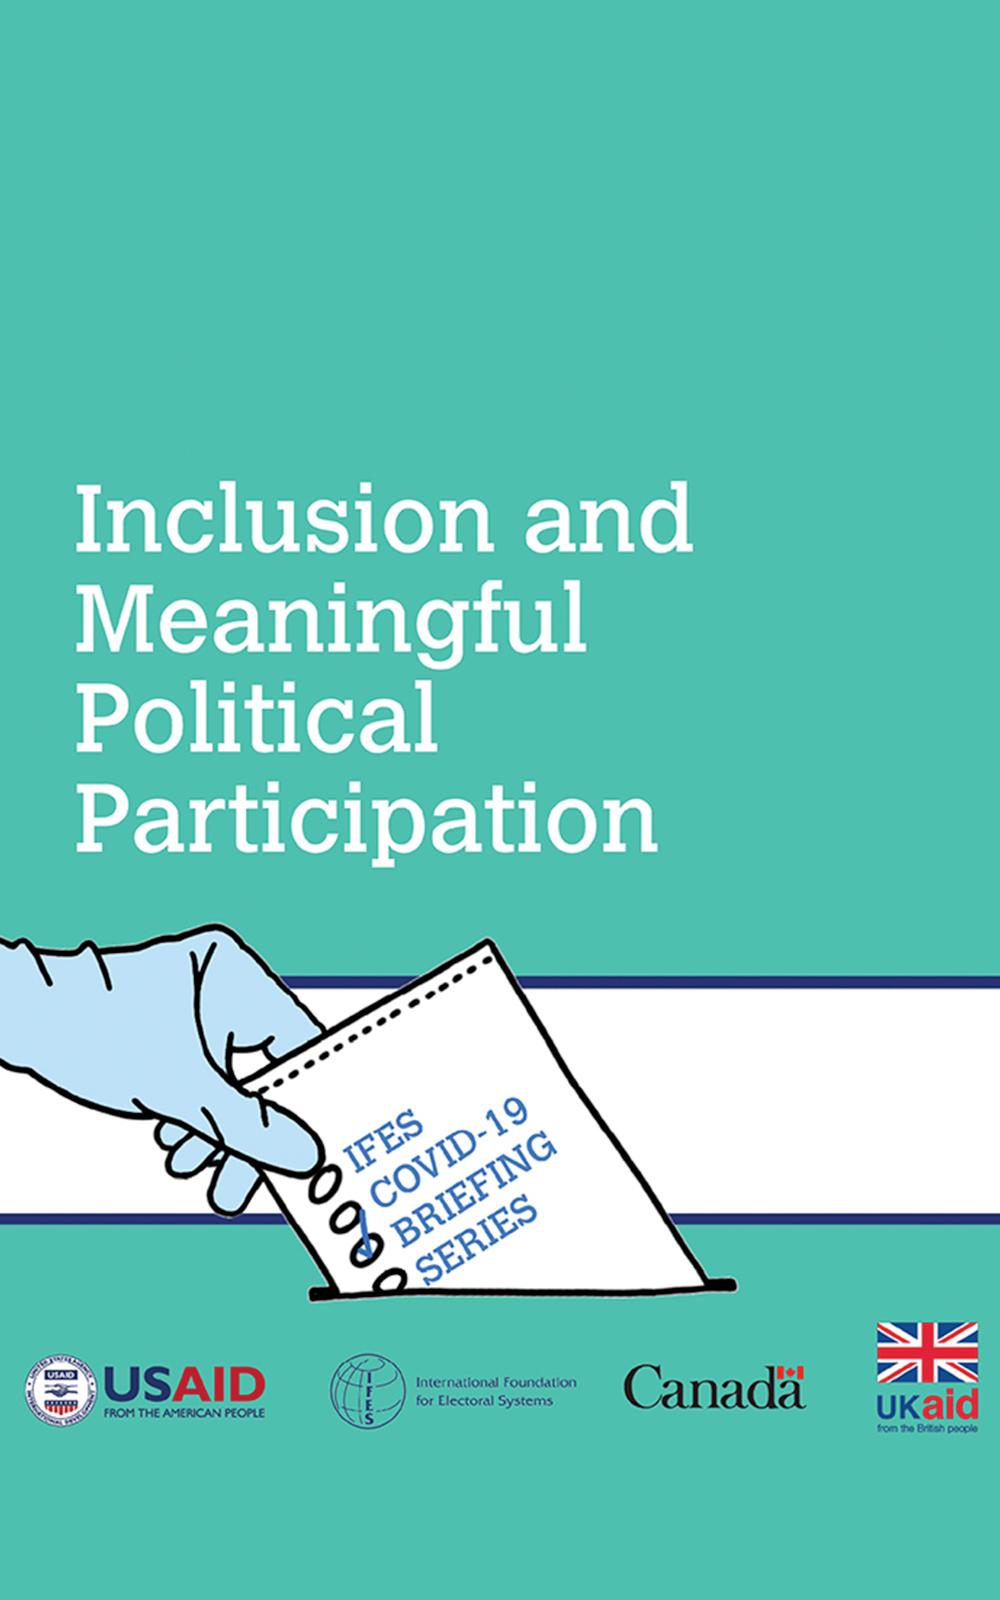 COVID-19 Inclusions and Meaningful Political Participation